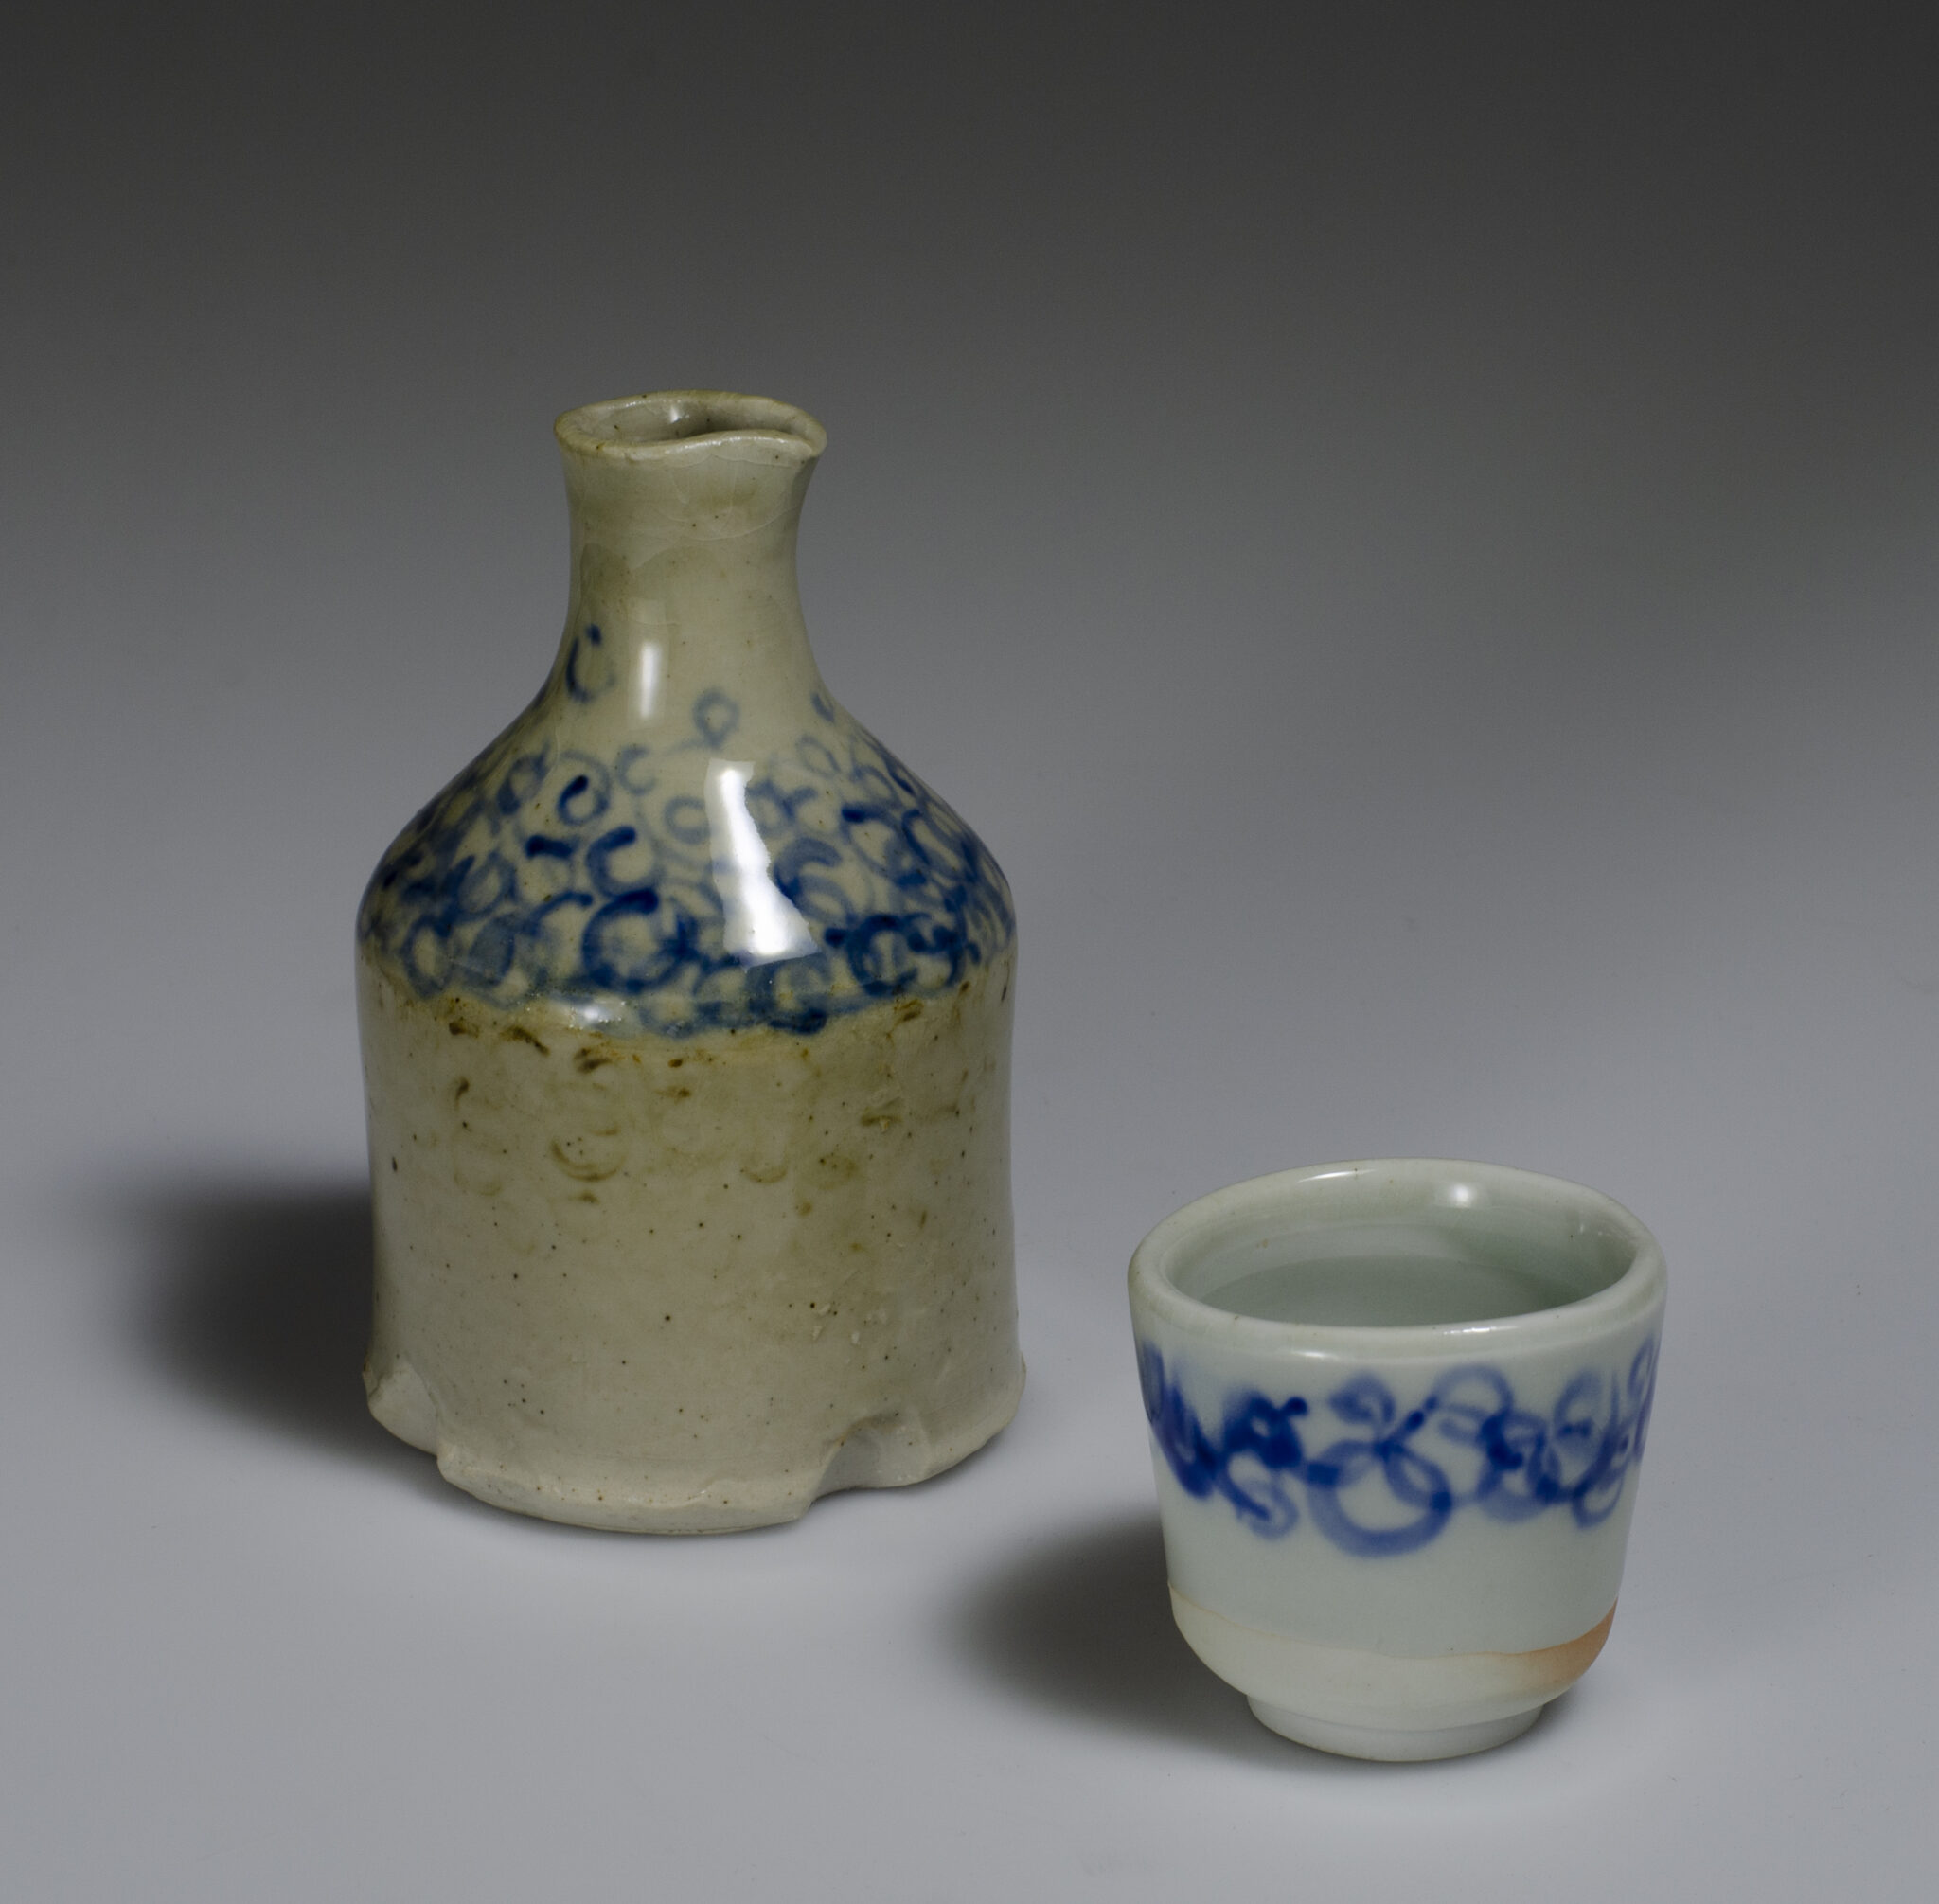 wood fired white porcelain tea bowl and pitcher with blue circle pattern underglaze and celadon glaze